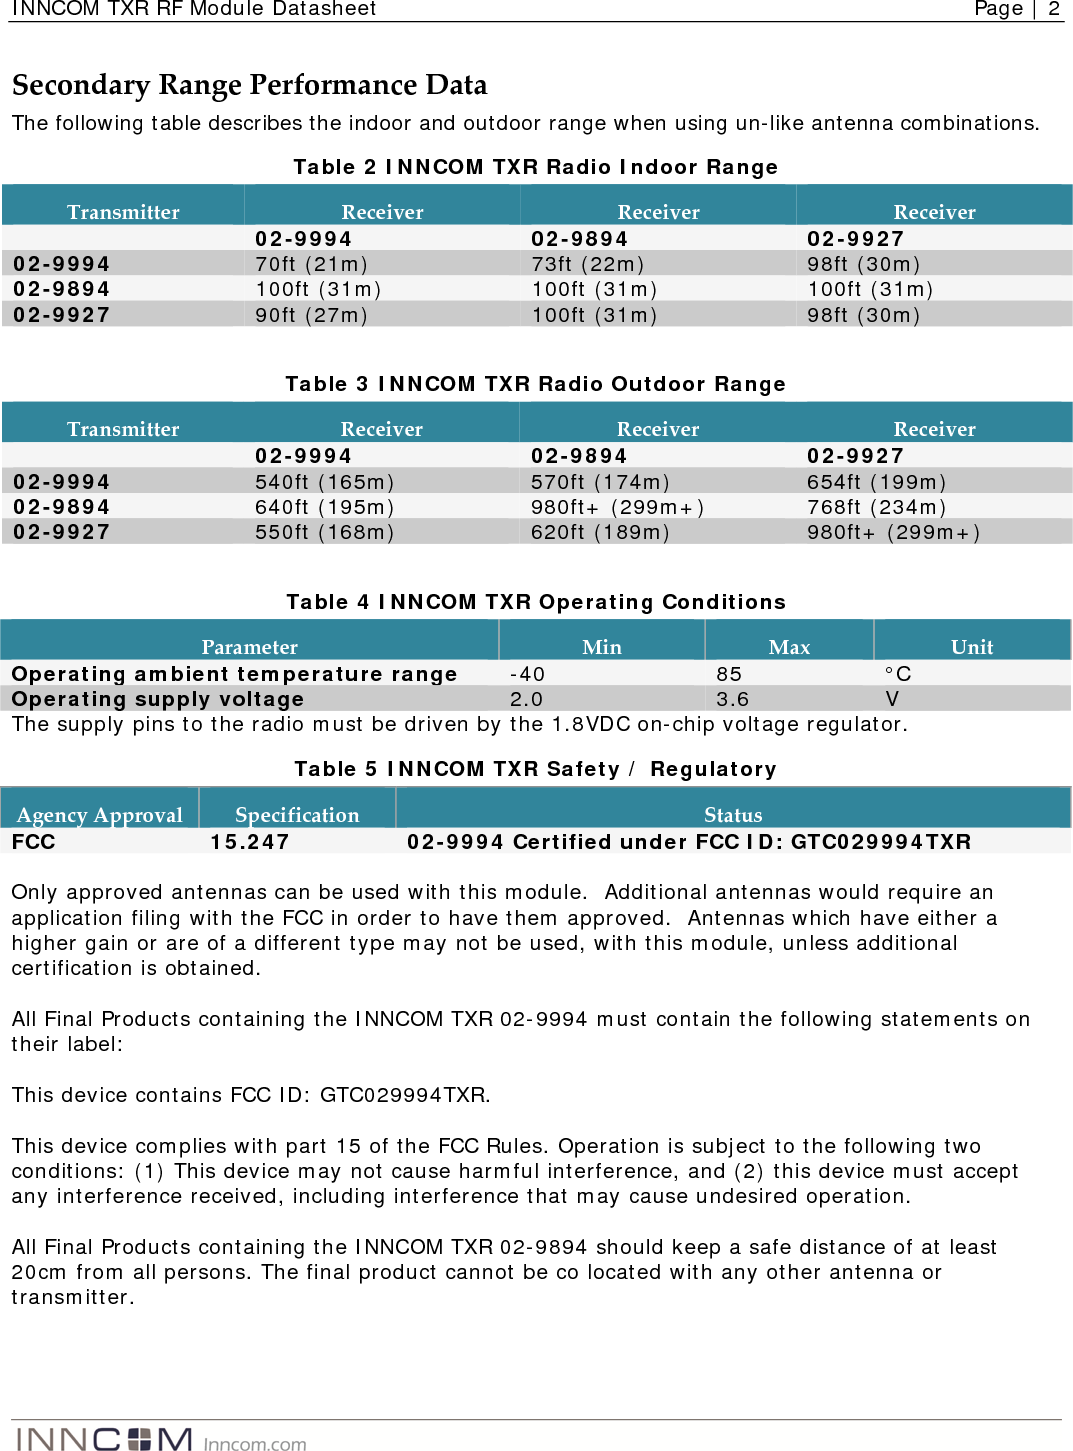 INNCOM TXR RF Module Datasheet    Page | 2   SecondaryRangePerformanceDataThe following table describes the indoor and outdoor range when using un-like antenna combinations. Table 2 INNCOM TXR Radio Indoor Range TransmitterReceiverReceiverReceiver 02-9994  02-9894  02-9927 02-9994  70ft (21m)  73ft (22m)  98ft (30m) 02-9894  100ft (31m)  100ft (31m)  100ft (31m) 02-9927  90ft (27m)  100ft (31m)  98ft (30m)  Table 3 INNCOM TXR Radio Outdoor Range TransmitterReceiverReceiverReceiver 02-9994  02-9894  02-9927 02-9994  540ft (165m)  570ft (174m)  654ft (199m) 02-9894  640ft (195m)  980ft+ (299m+)  768ft (234m) 02-9927  550ft (168m)  620ft (189m)  980ft+ (299m+)  Table 4 INNCOM TXR Operating Conditions ParameterMinMaxUnitOperating ambient temperature range  -40  85  °C Operating supply voltage  2.0  3.6  V The supply pins to the radio must be driven by the 1.8VDC on-chip voltage regulator. Table 5 INNCOM TXR Safety / Regulatory AgencyApprovalSpecificationStatusFCC 15.247 02-9994 Certified under FCC ID: GTC029994TXR  Only approved antennas can be used with this module.  Additional antennas would require an application filing with the FCC in order to have them approved.  Antennas which have either a higher gain or are of a different type may not be used, with this module, unless additional certification is obtained.    All Final Products containing the INNCOM TXR 02-9994 must contain the following statements on their label:  This device contains FCC ID: GTC029994TXR.    This device complies with part 15 of the FCC Rules. Operation is subject to the following two conditions: (1) This device may not cause harmful interference, and (2) this device must accept any interference received, including interference that may cause undesired operation.  All Final Products containing the INNCOM TXR 02-9894 should keep a safe distance of at least 20cm from all persons. The final product cannot be co located with any other antenna or transmitter.    